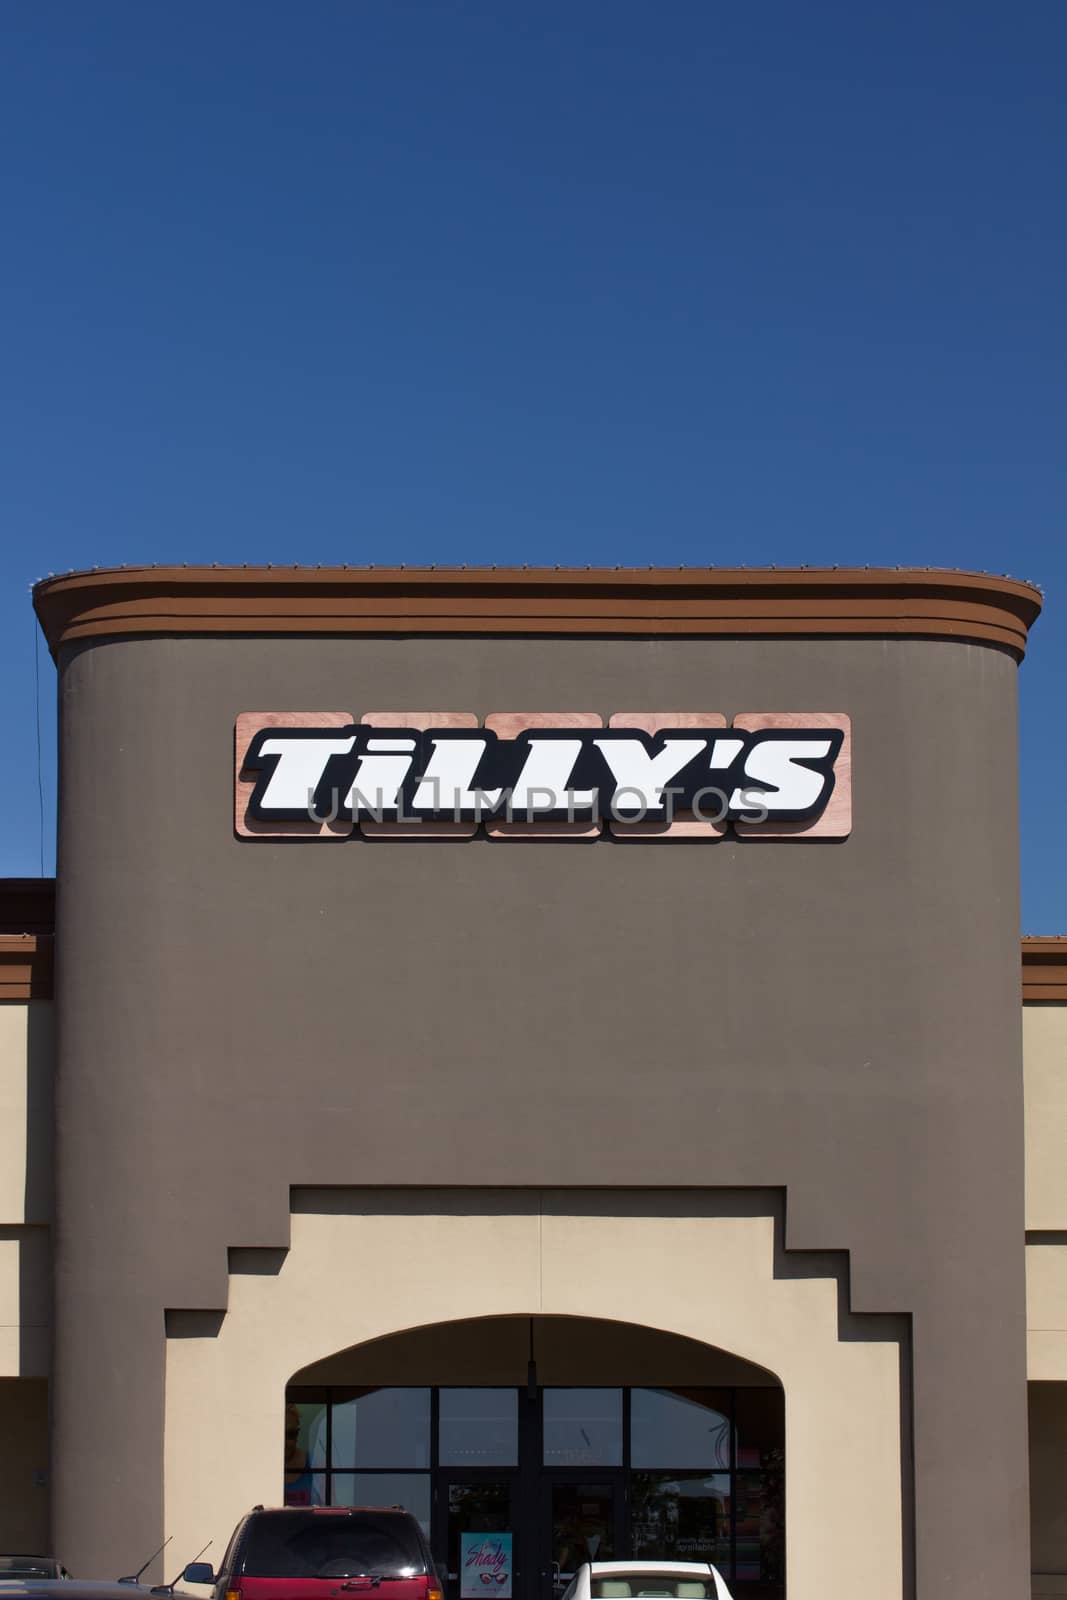  Tilly's Department Store exterior by wolterk